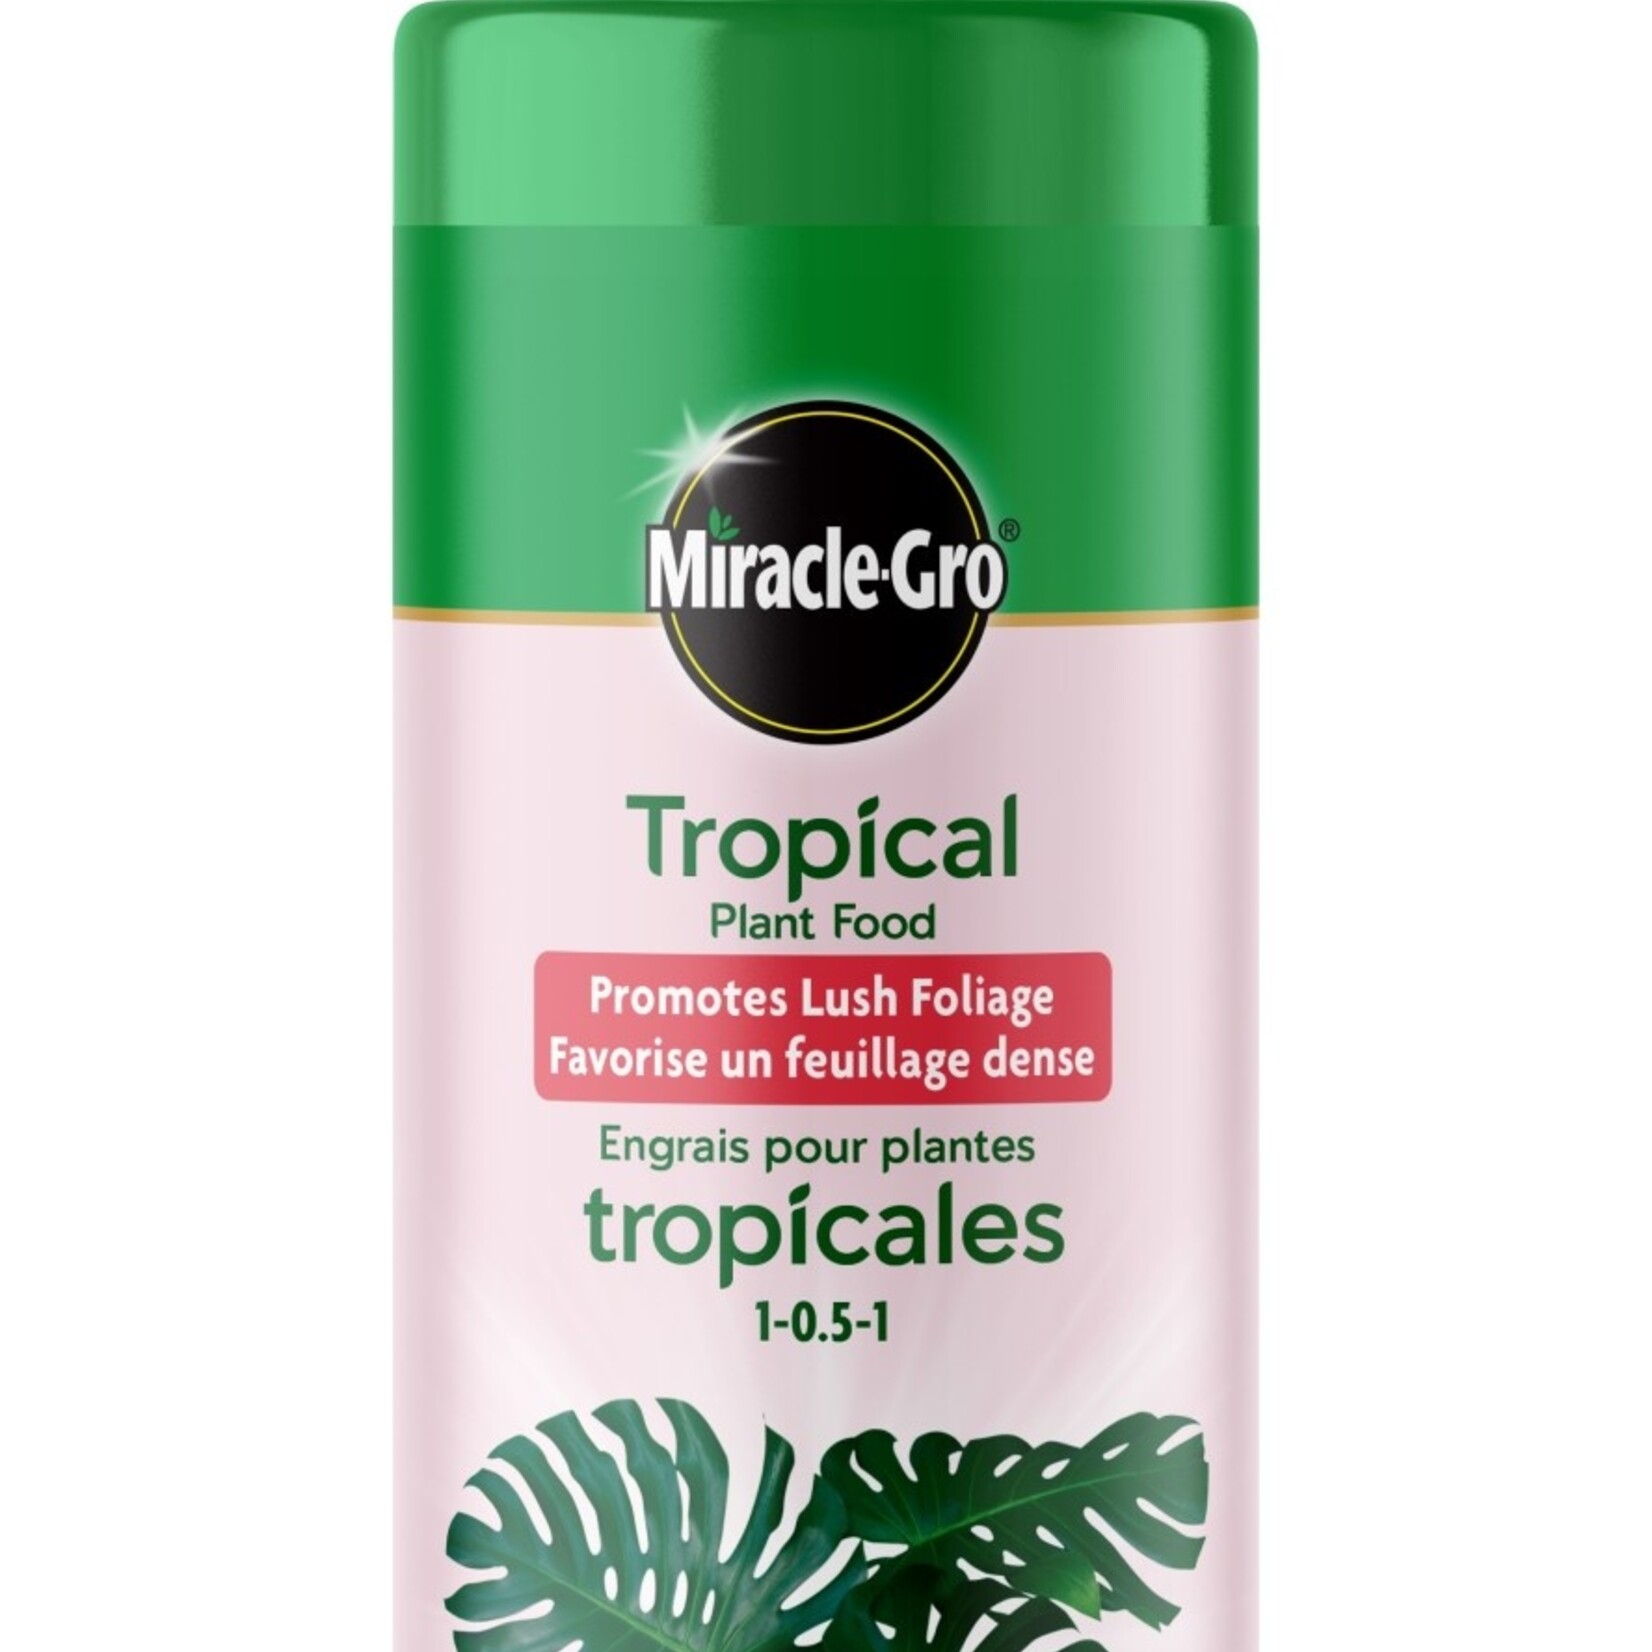 Miracle Gro Miracle-Gro Tropical Plant Food 1-0.5-1 236mL